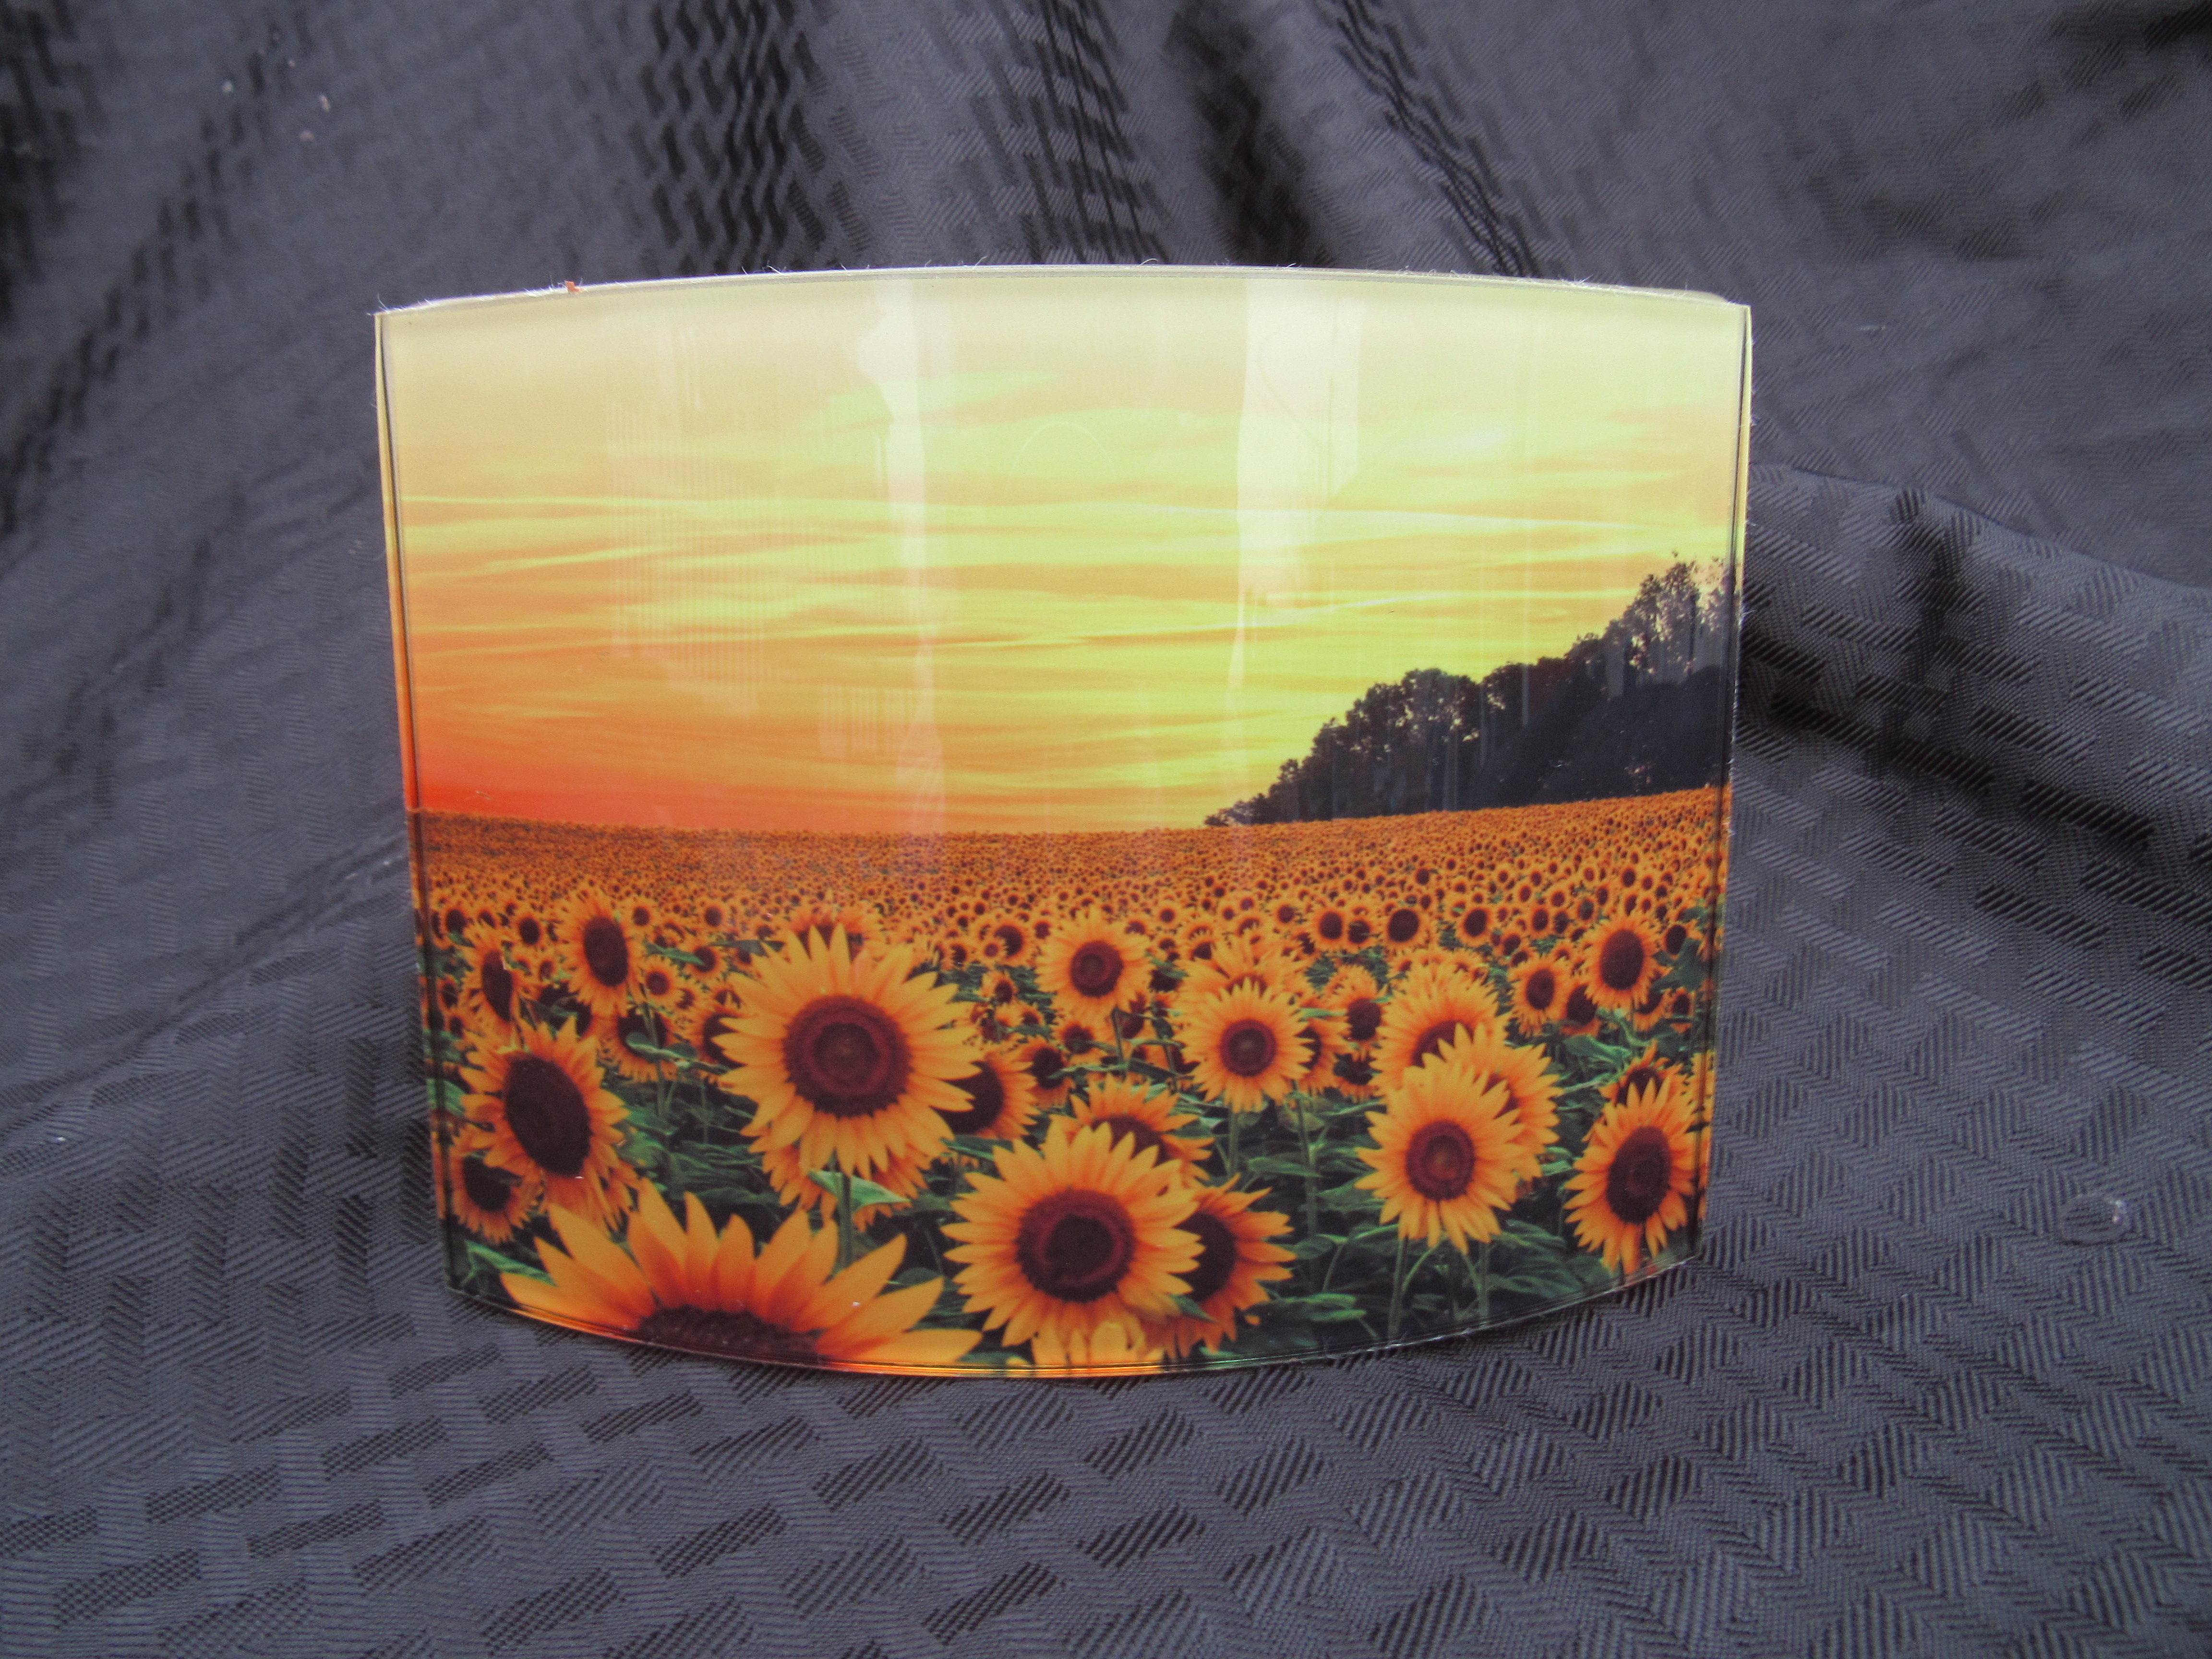 Field of Sunflowers made with sublimation printing